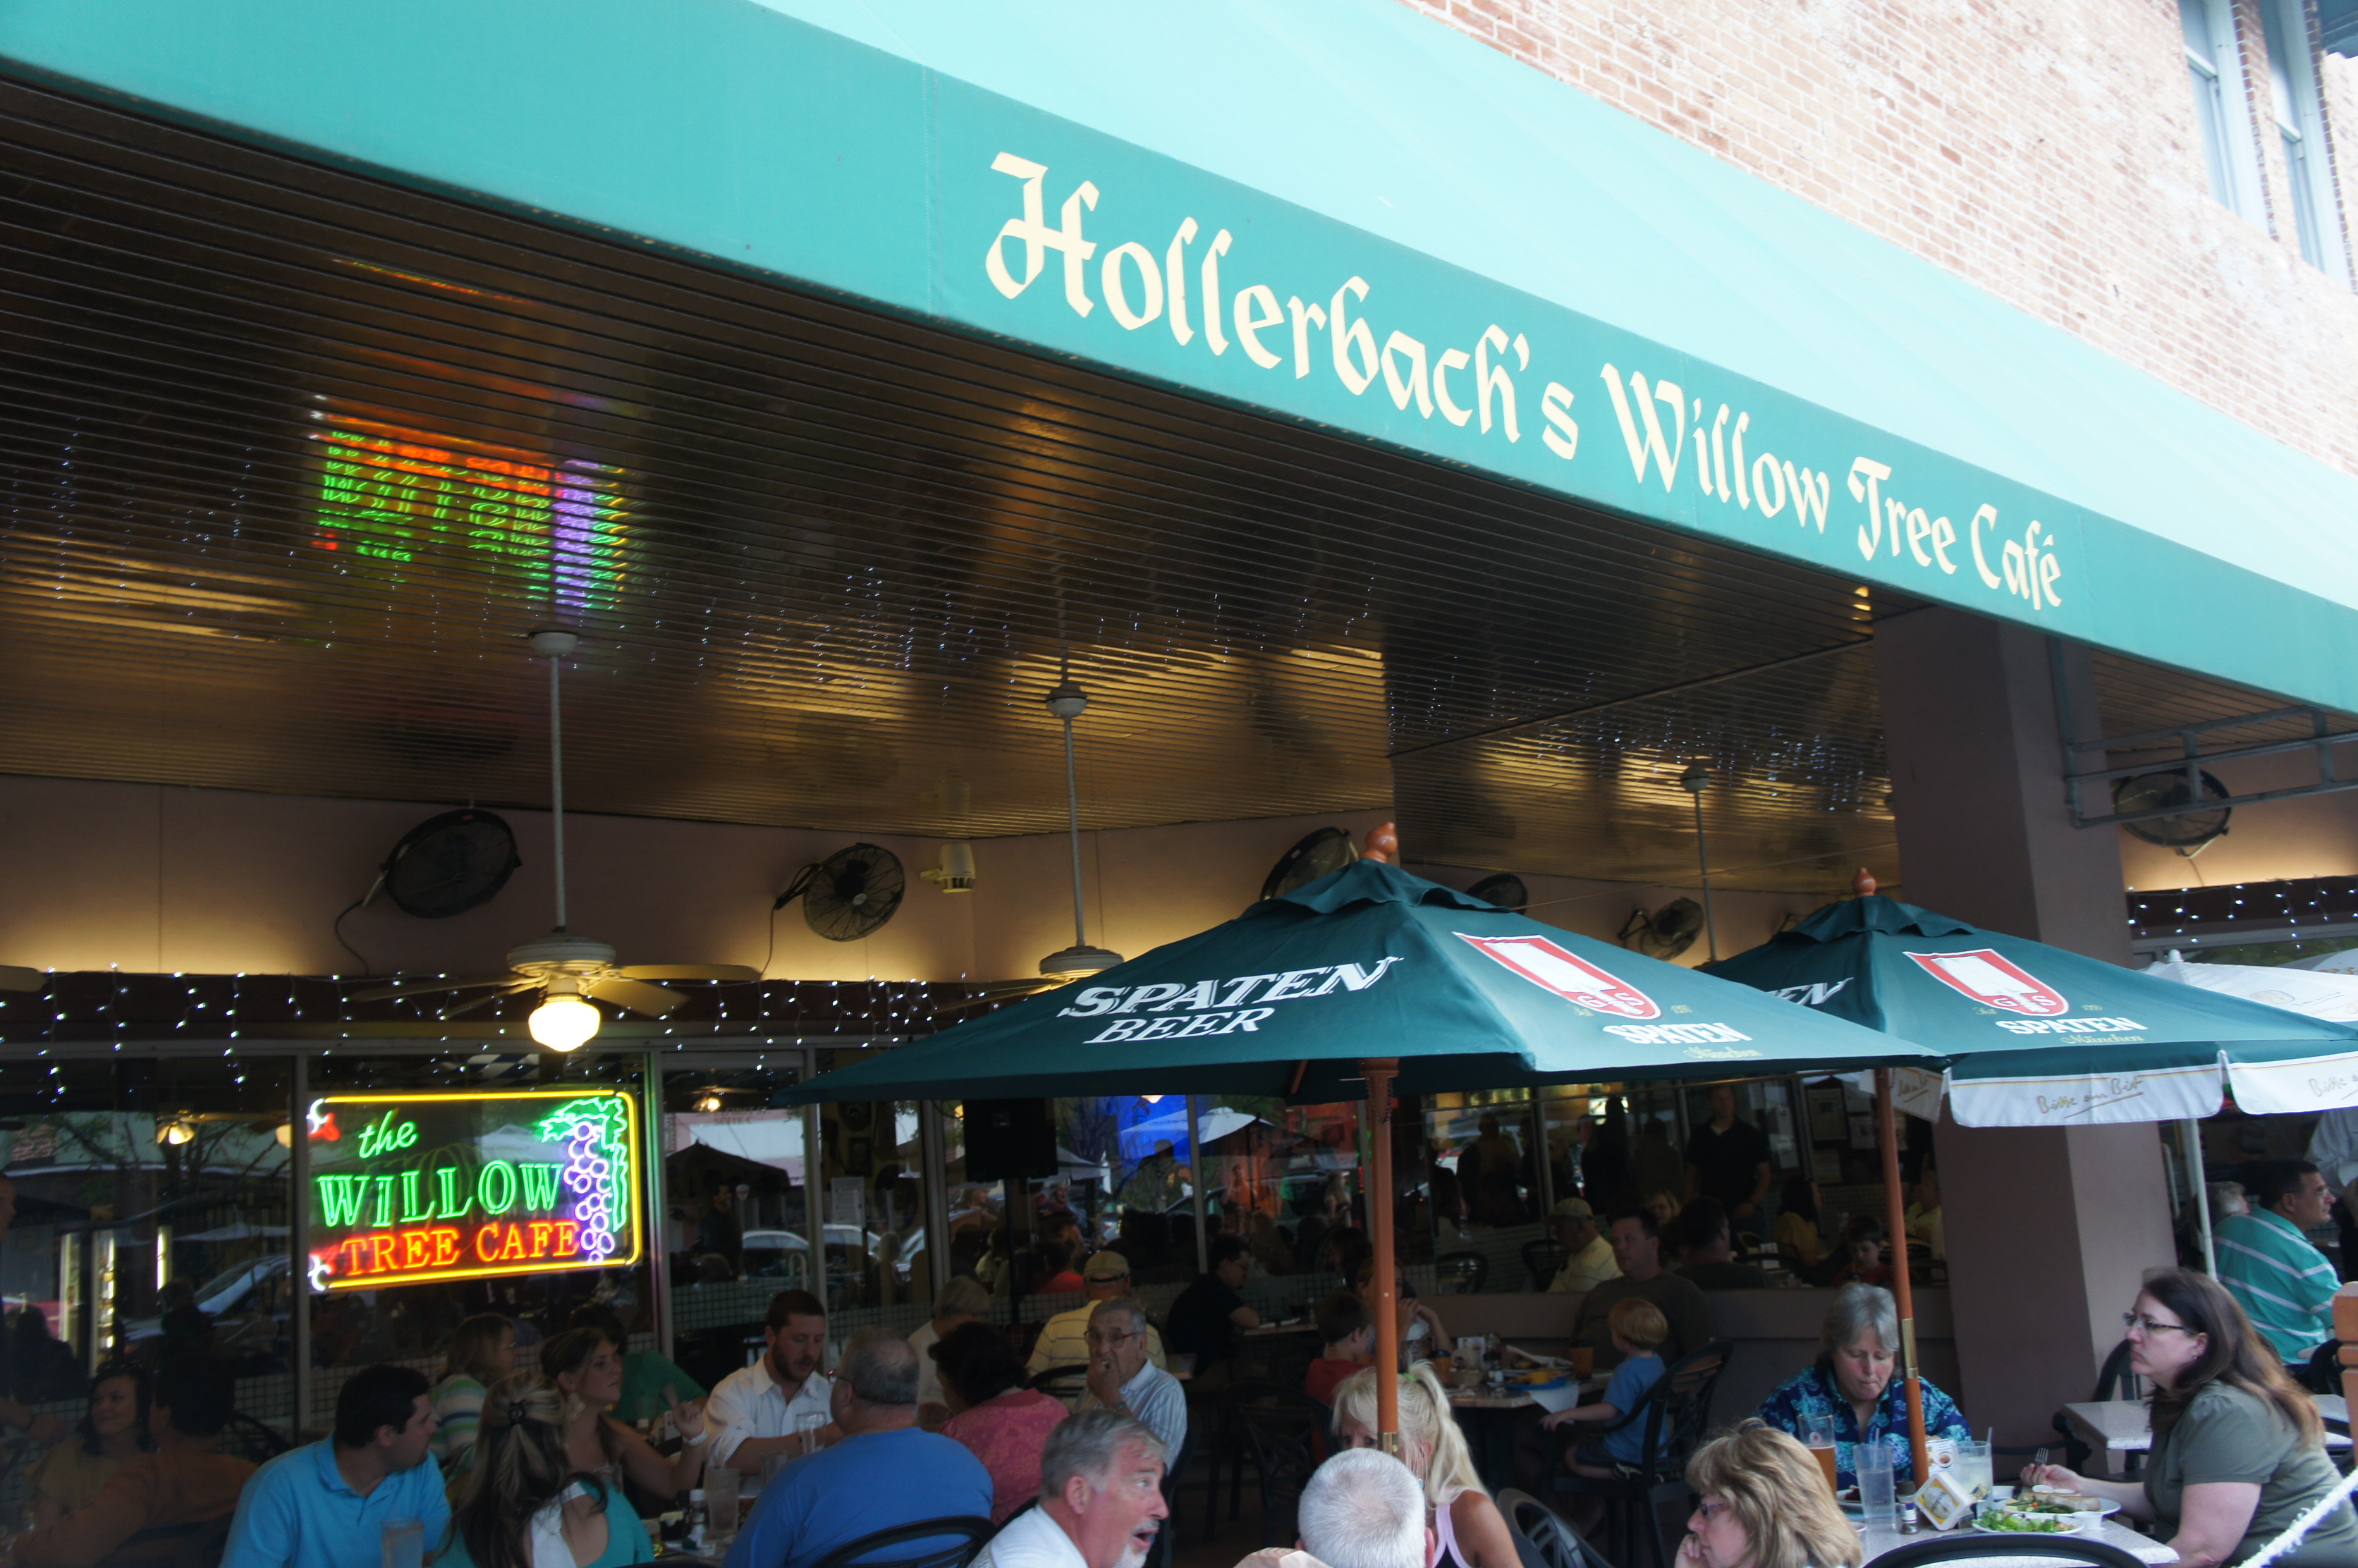 Hollerbach’s Willow Tree Cafe